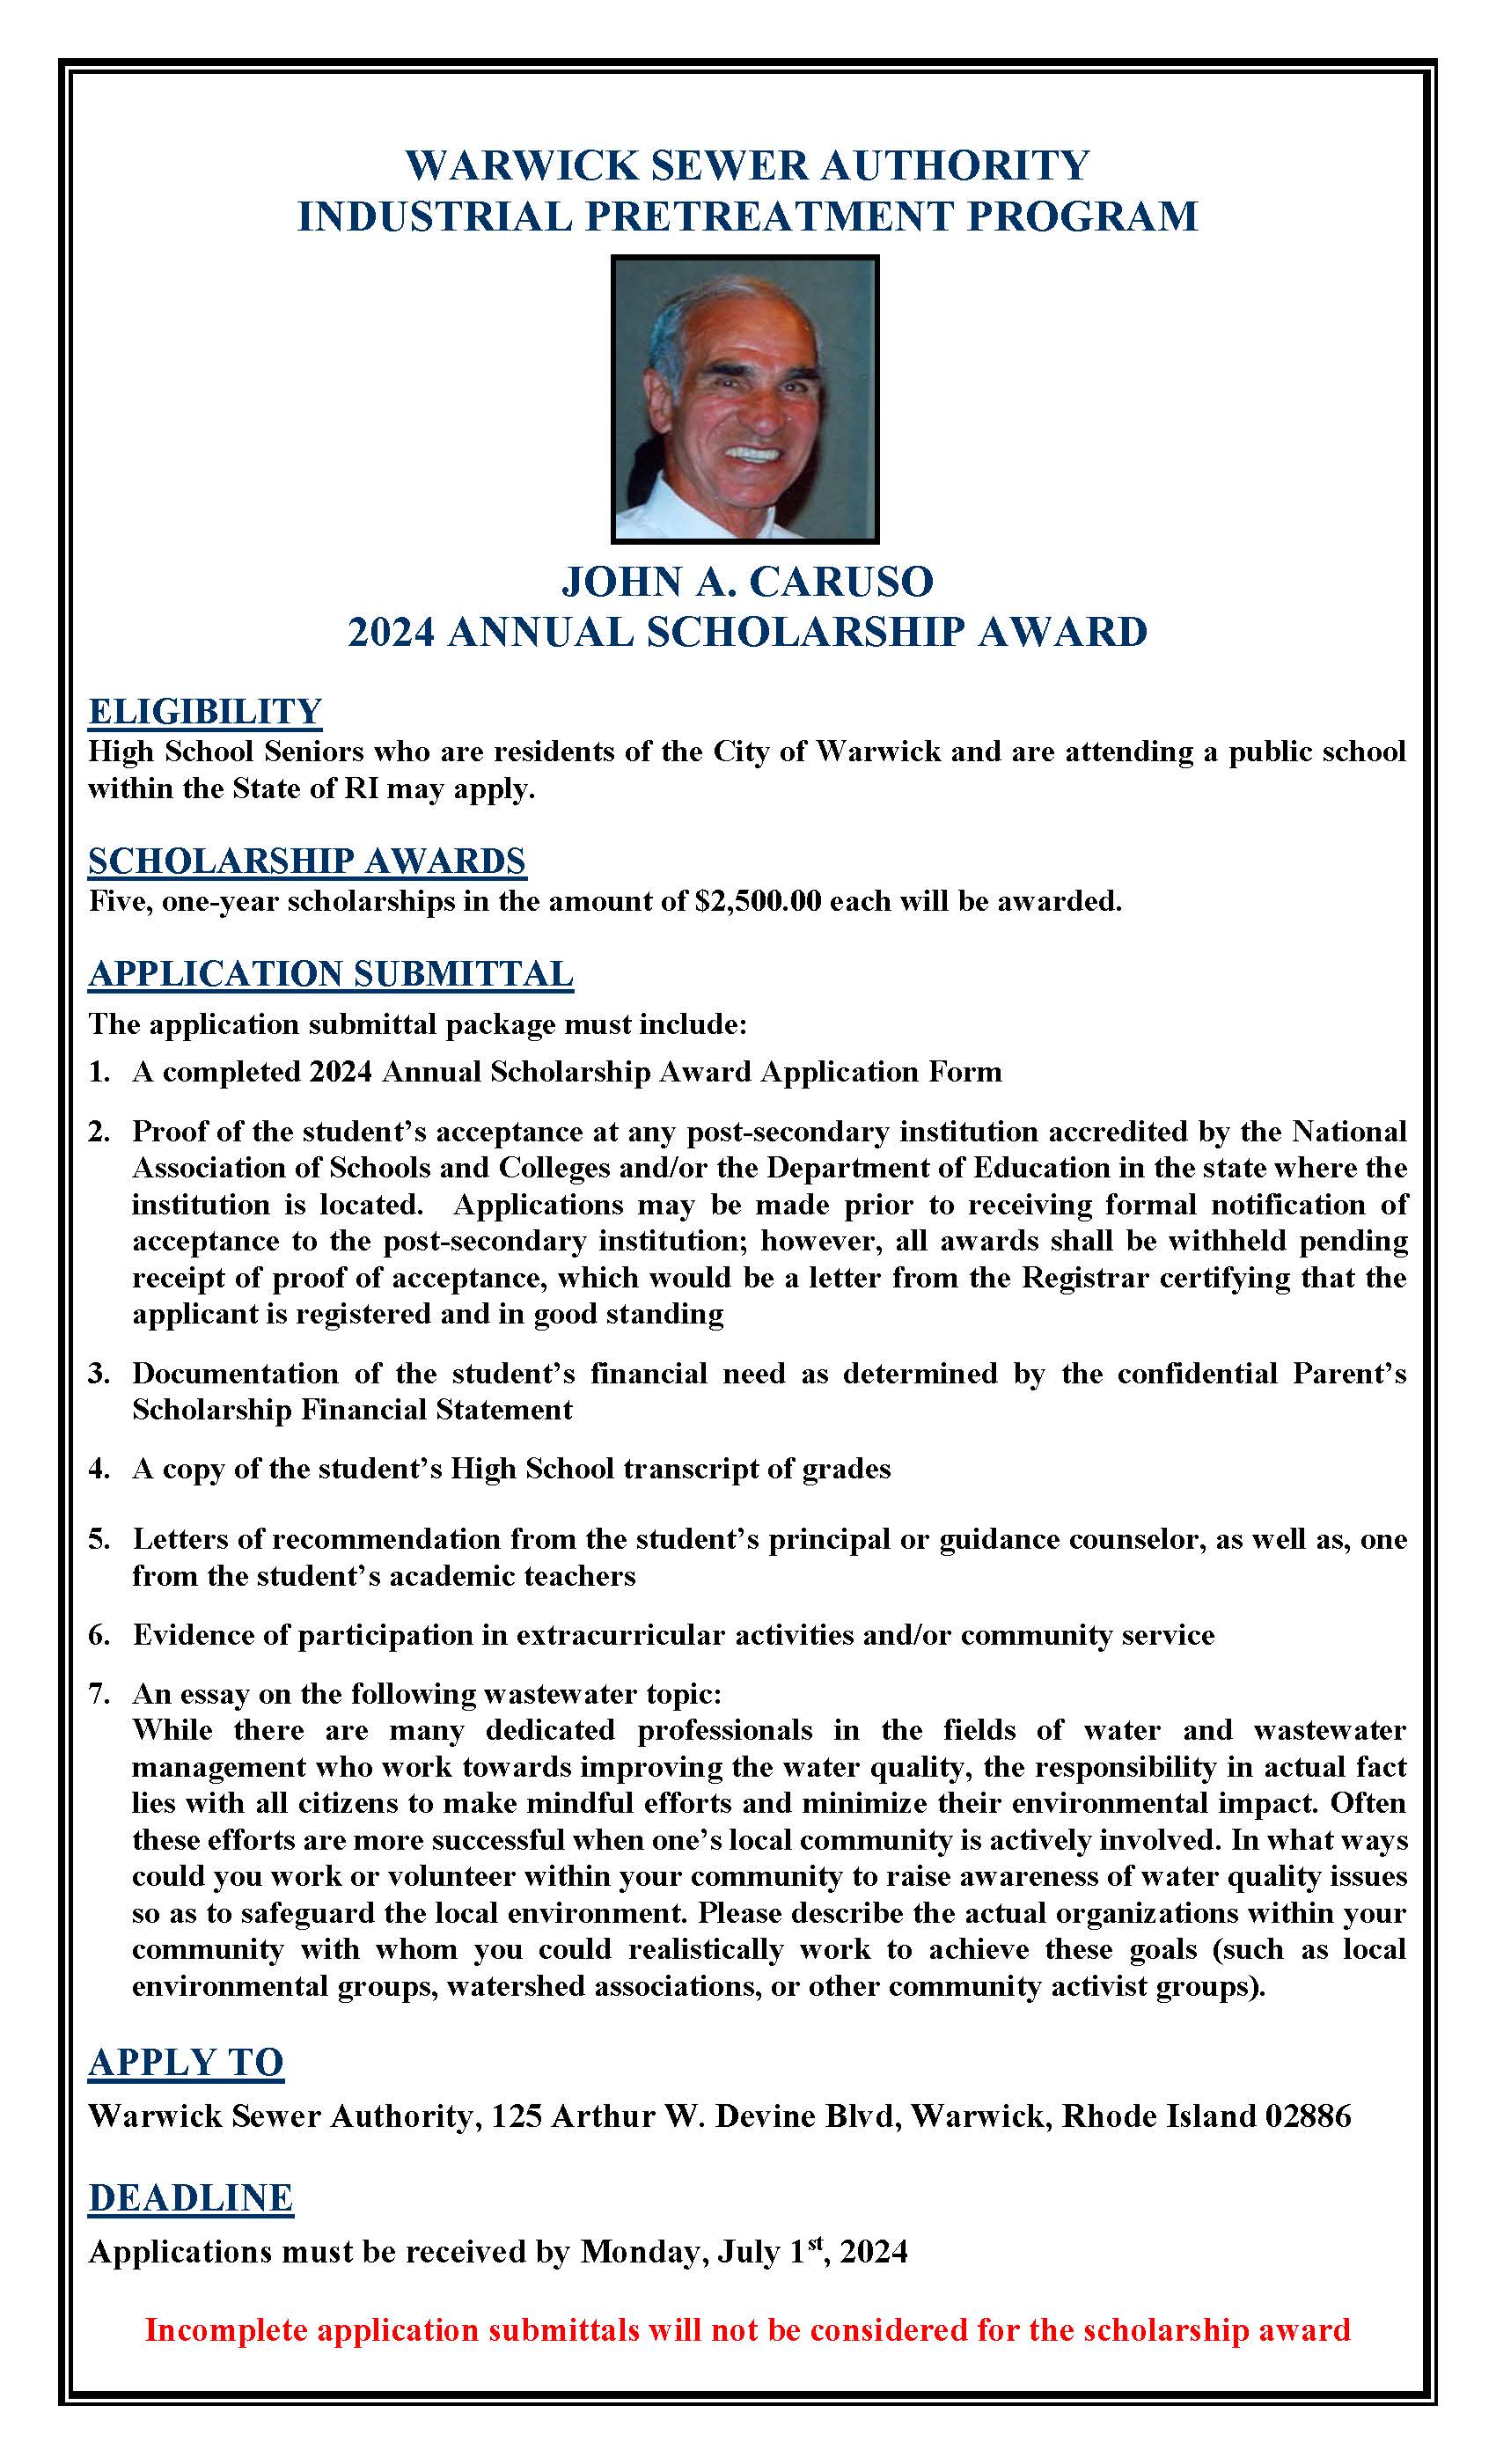 John A. Caruso Scholarship Award offered by the Warwick Sewer Authority Flyer